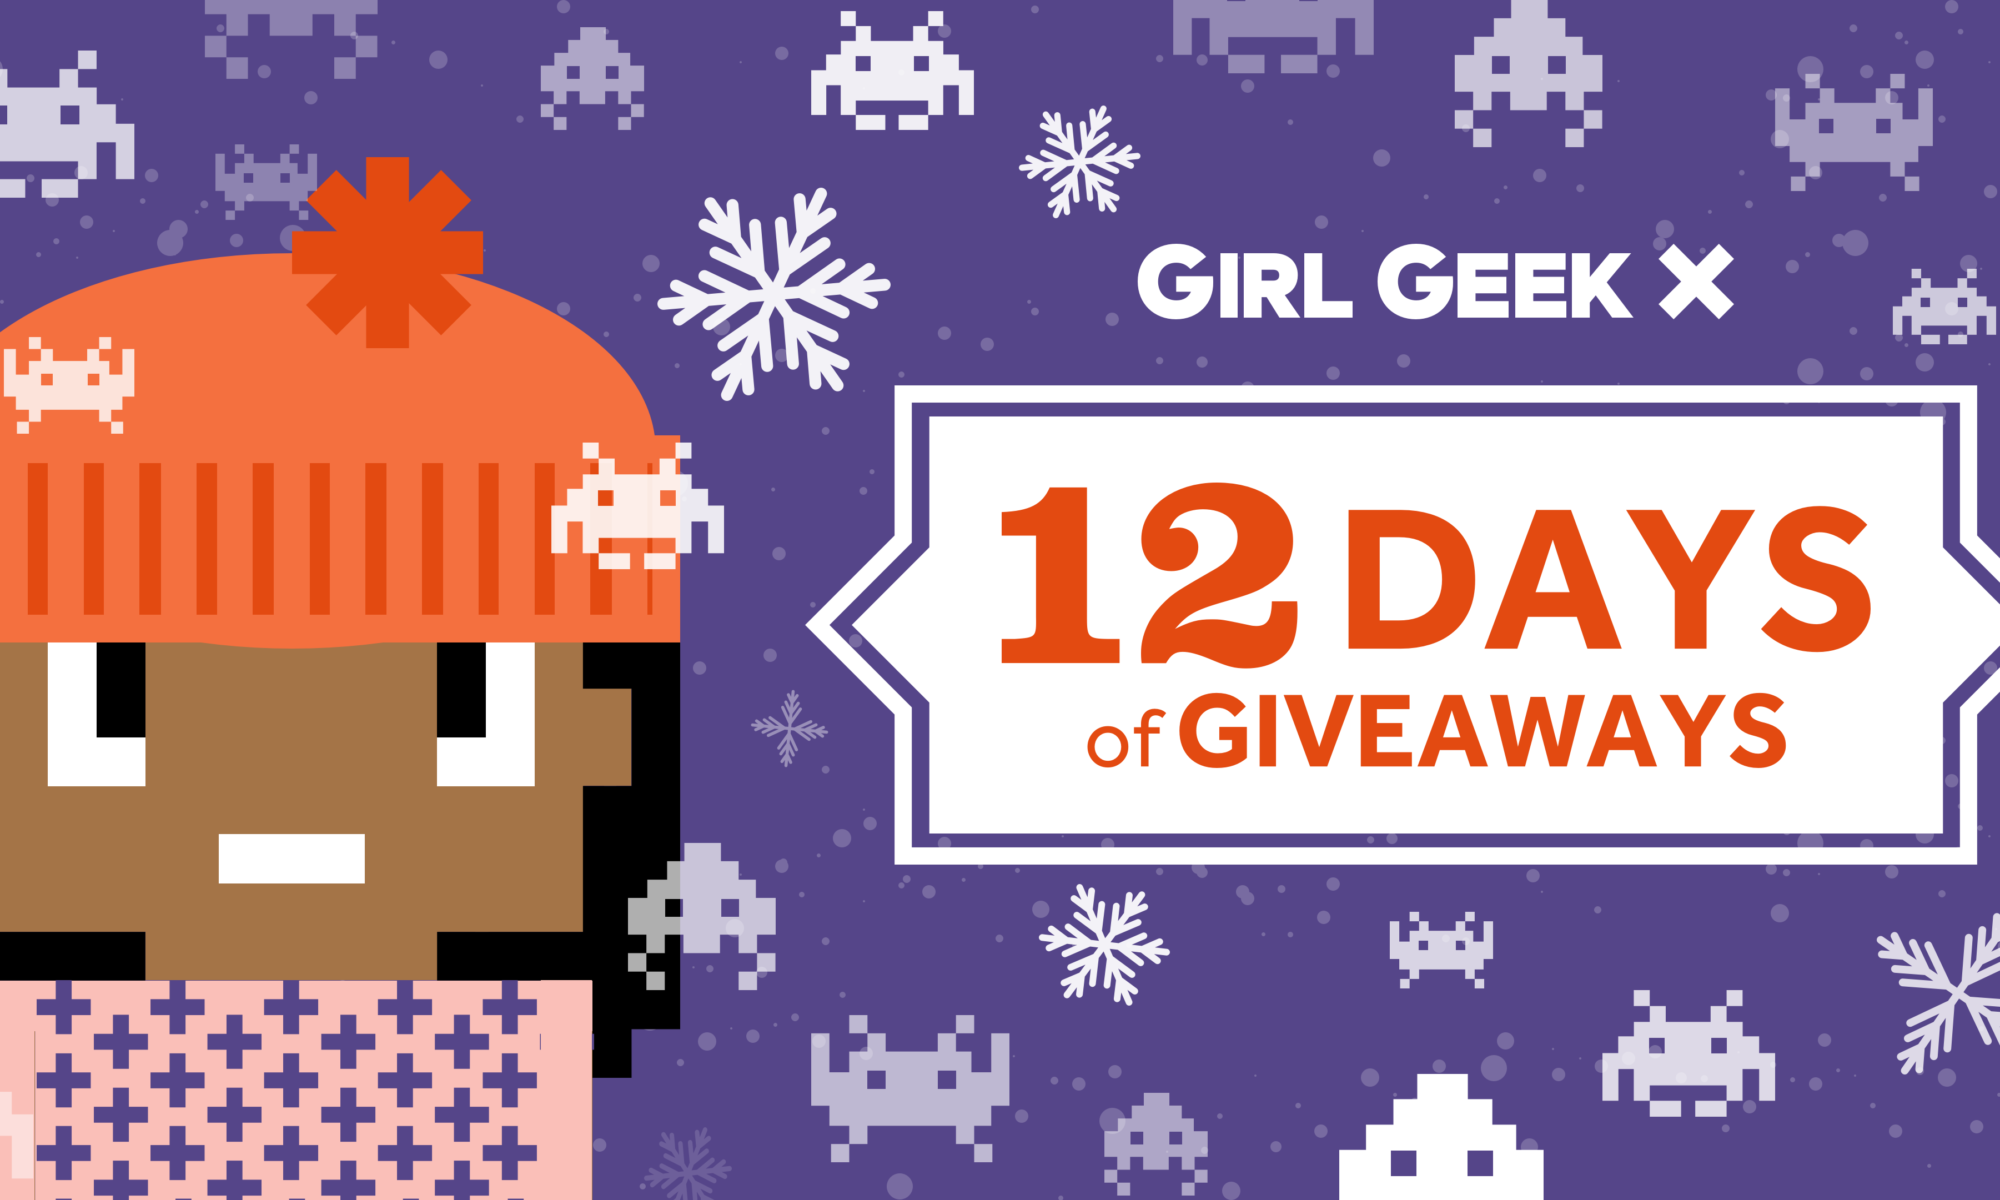 Girl Geek X - 12 Days of Giveaways Holiday Sweepstakes